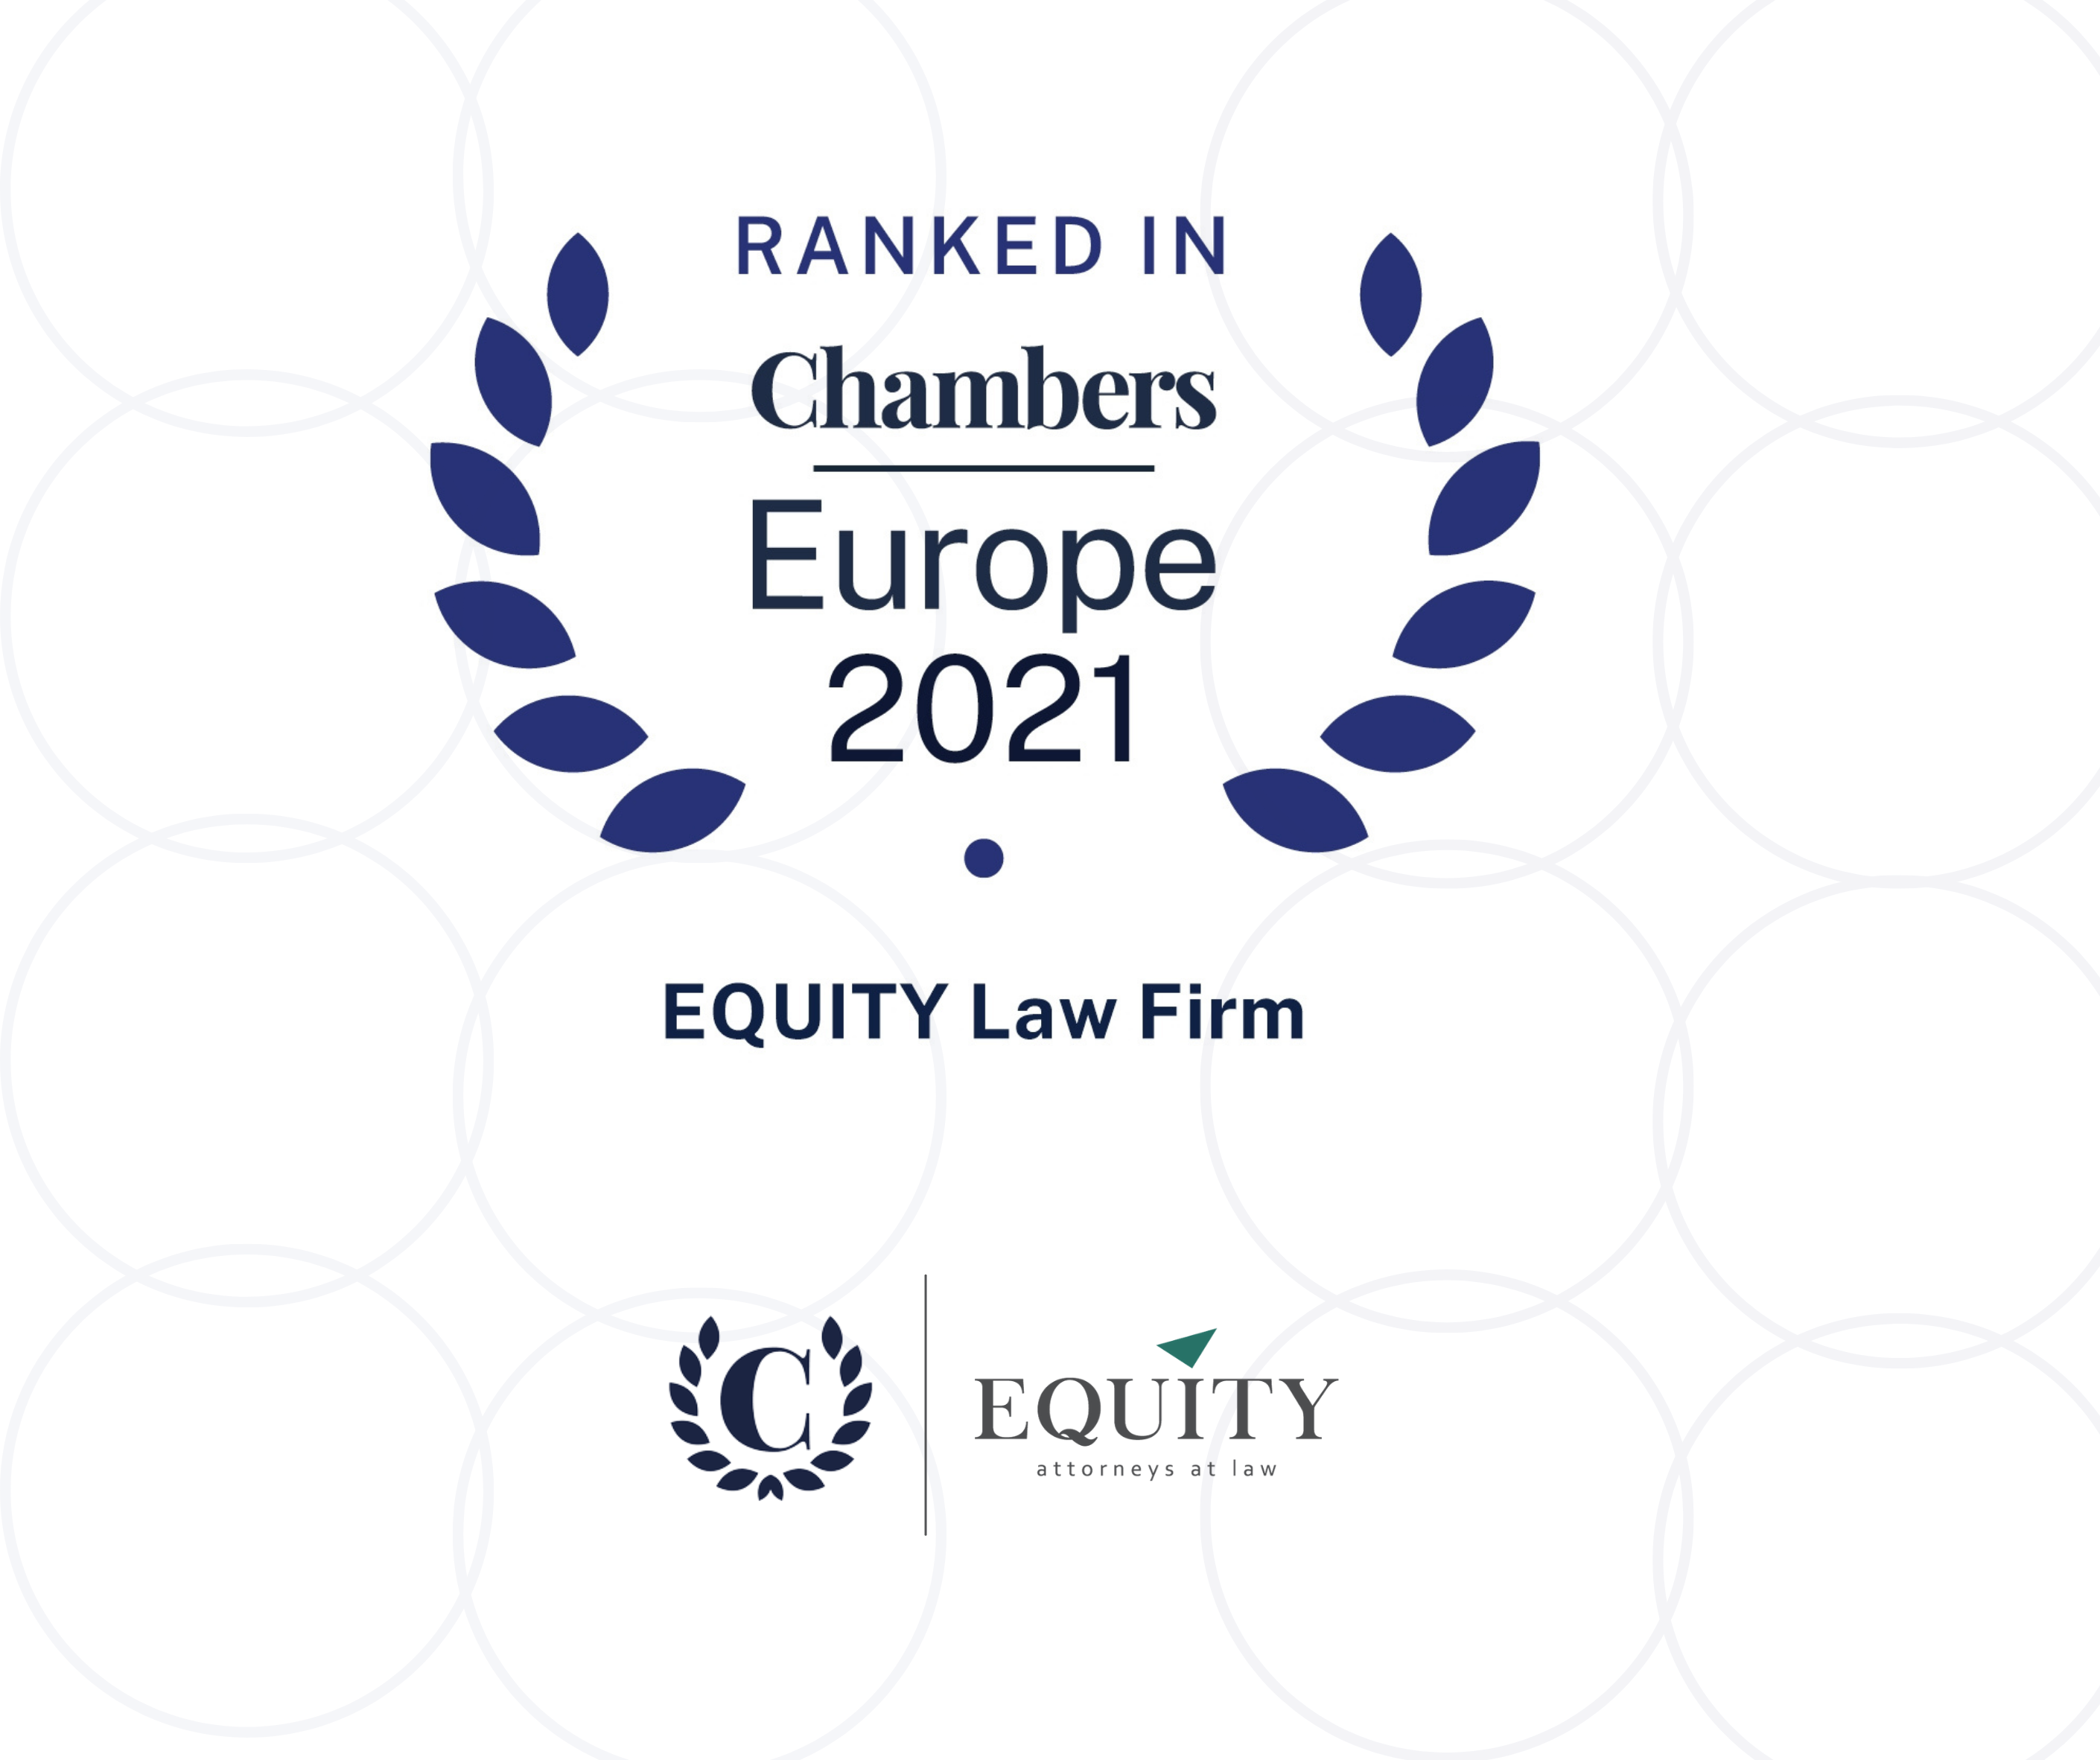 EQUITY Law Firm is ranked in Chambers and Partners 2021!